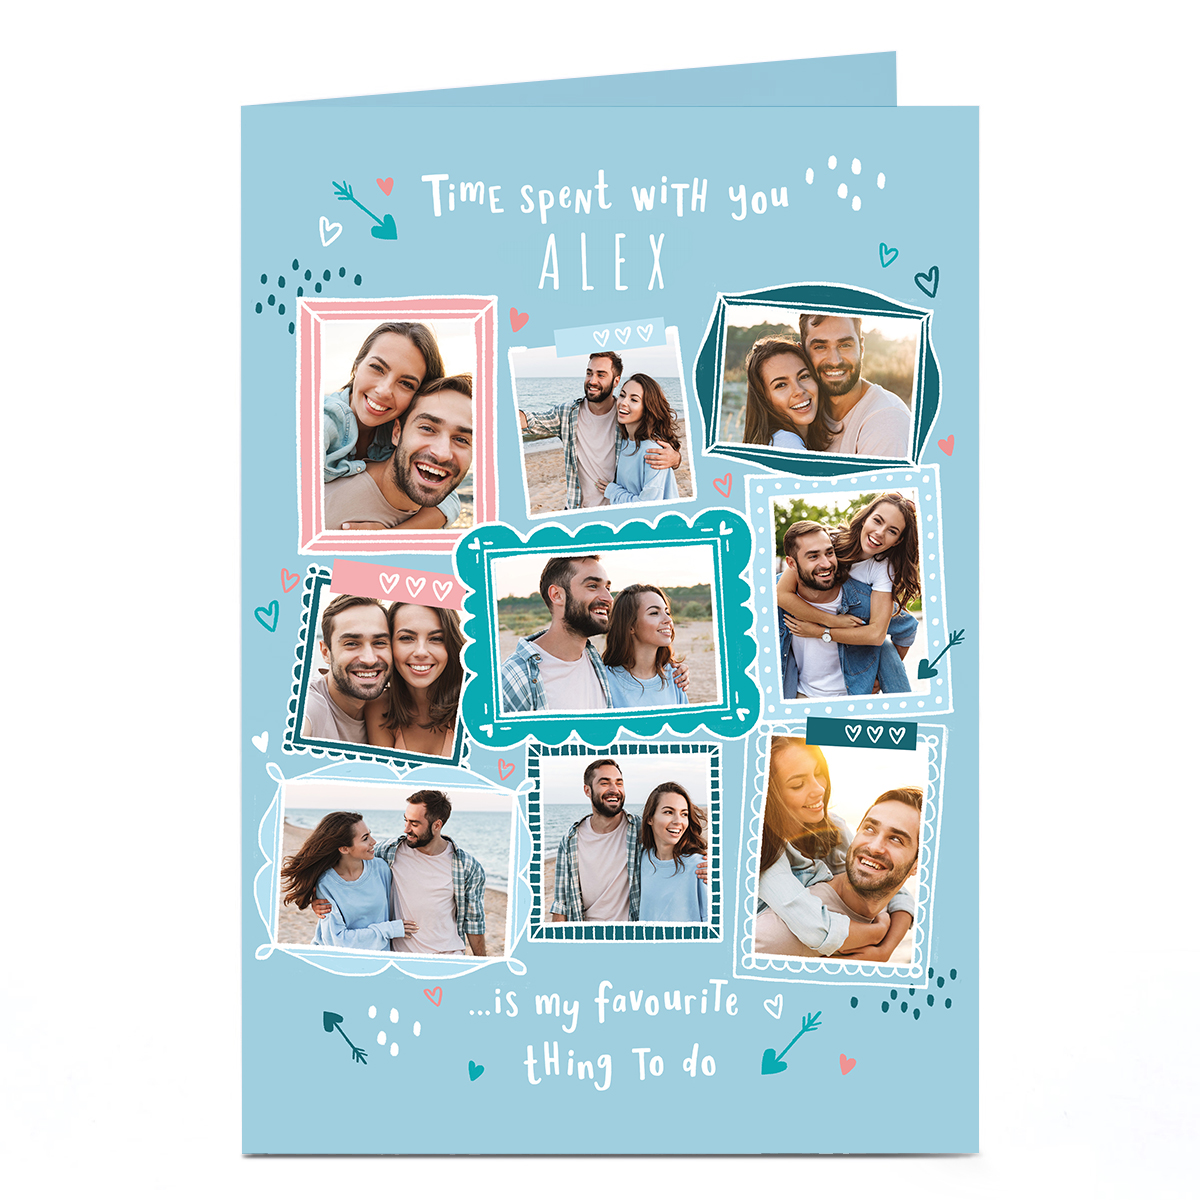 A4 Photo Valentine's Day Card - Time Spent with You